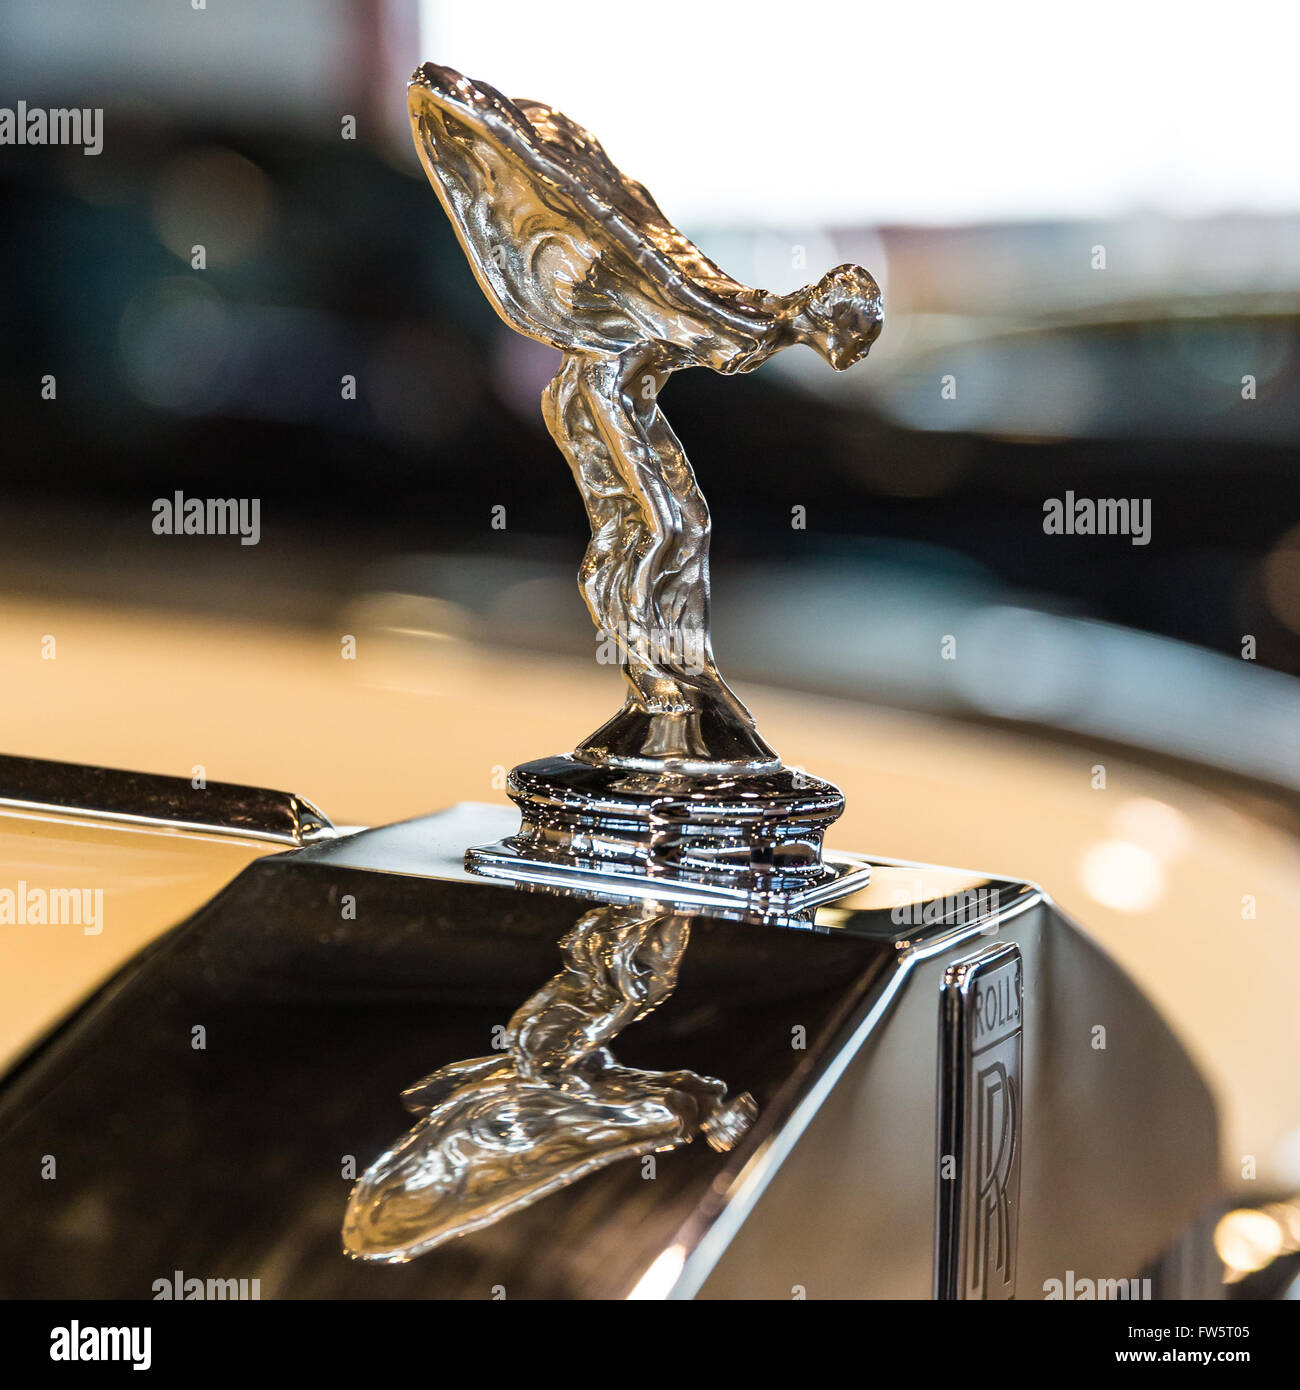 Verona, Italy - May 09,2015: The Spirit of Ecstasy is the bonnet ornament on Rolls-Royce cars. Stock Photo